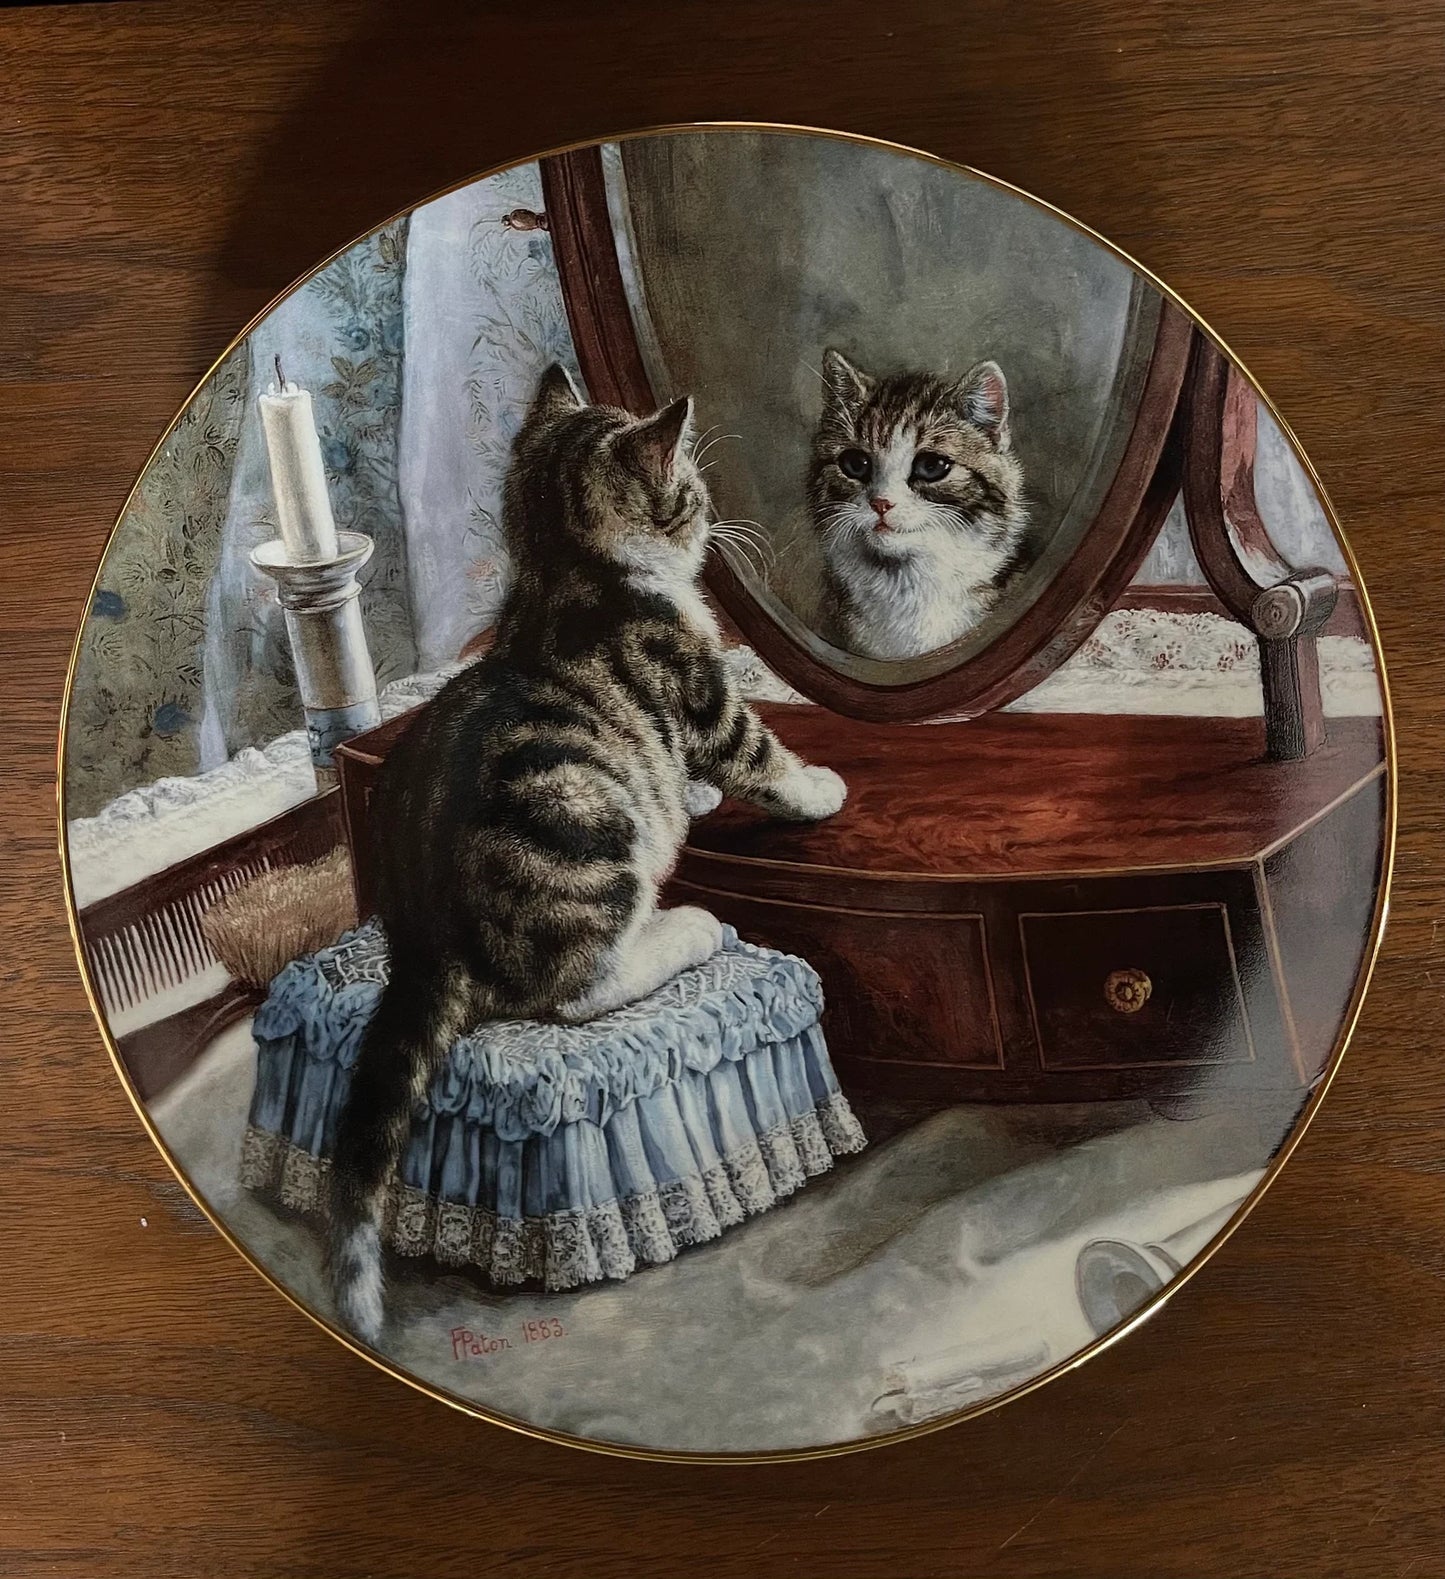 Collectable Plates, Vintage "Who's The Fairest of Them All" Cat Plate, Home Decor